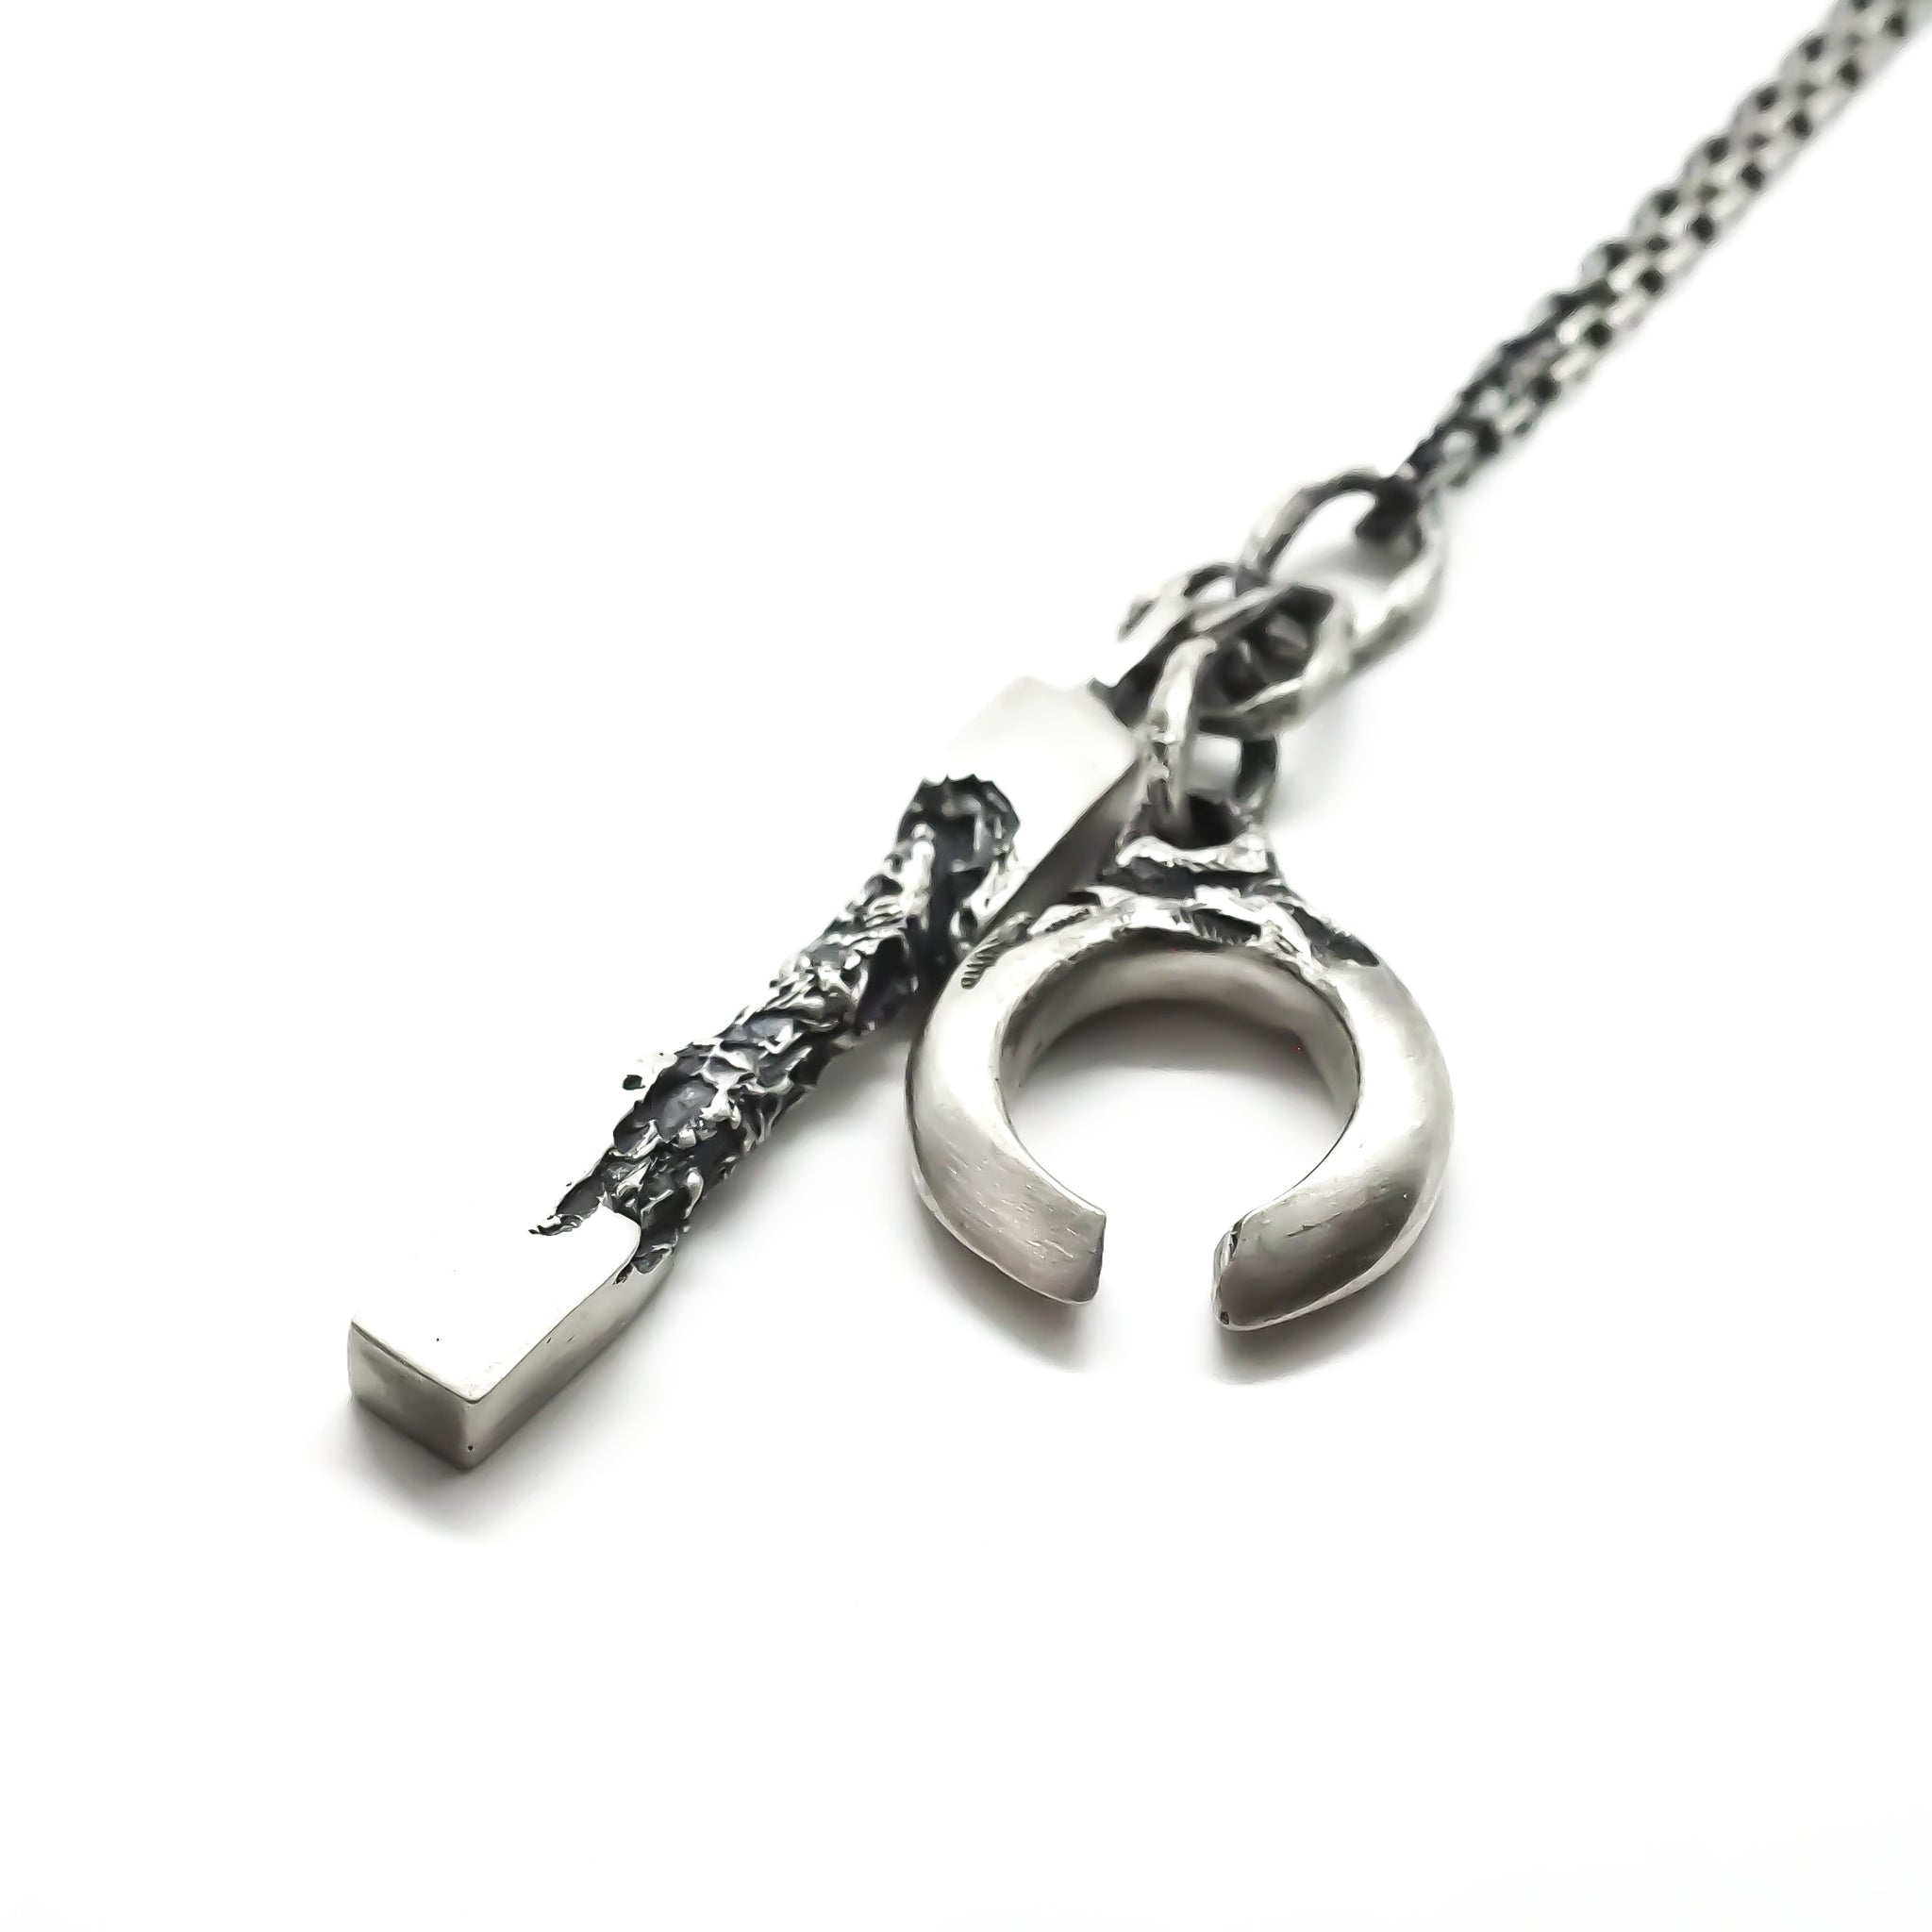 FORNAX NECKLACE